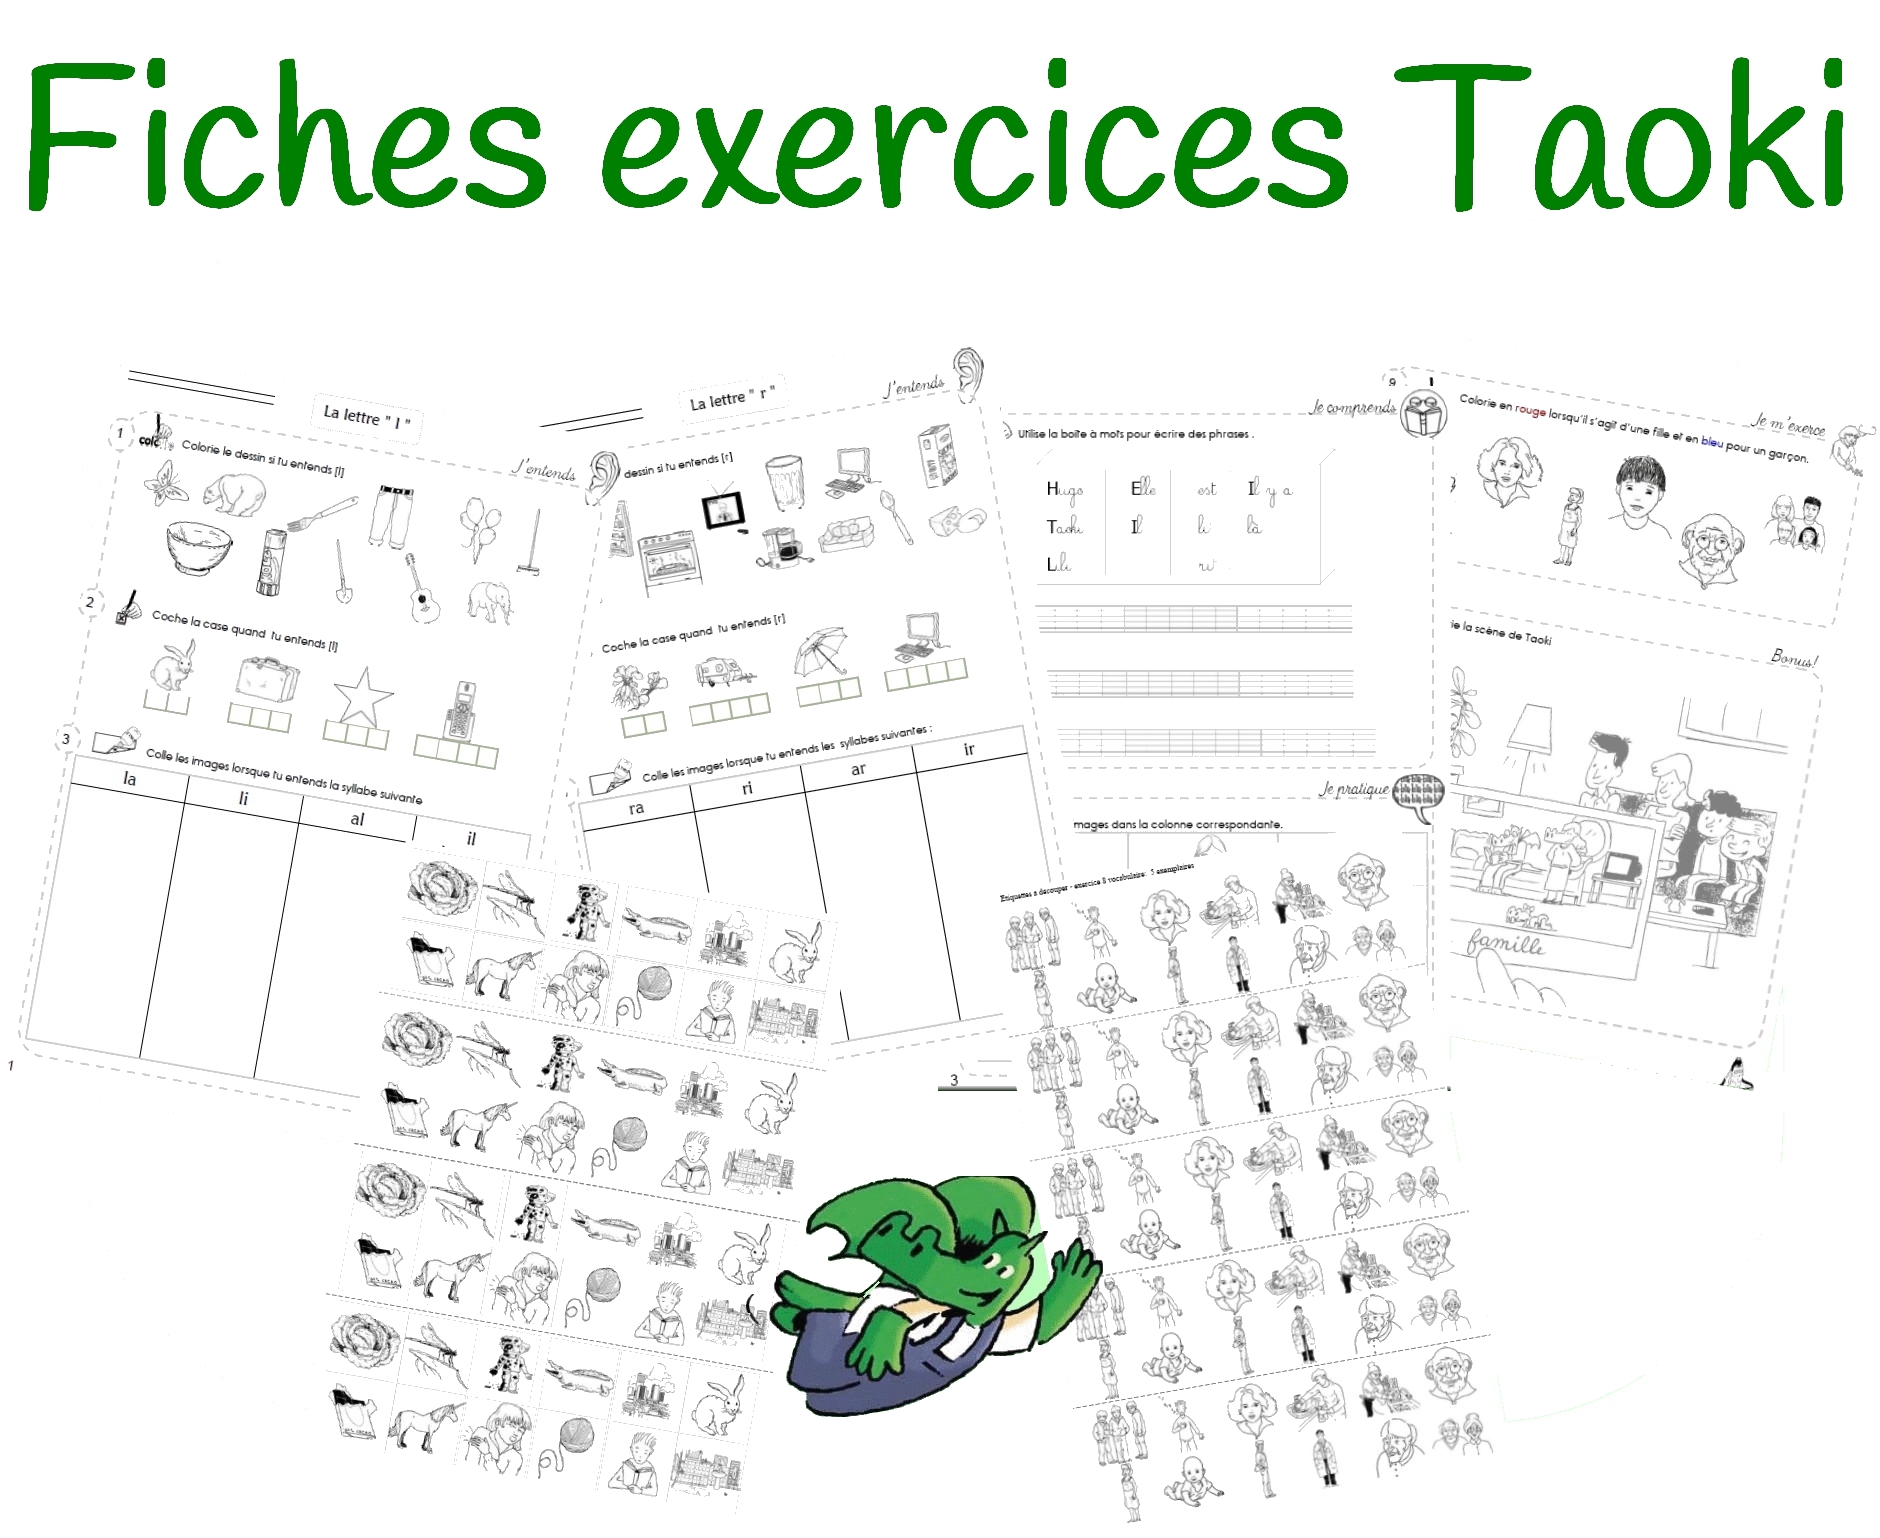 Fiches exercices Taoki